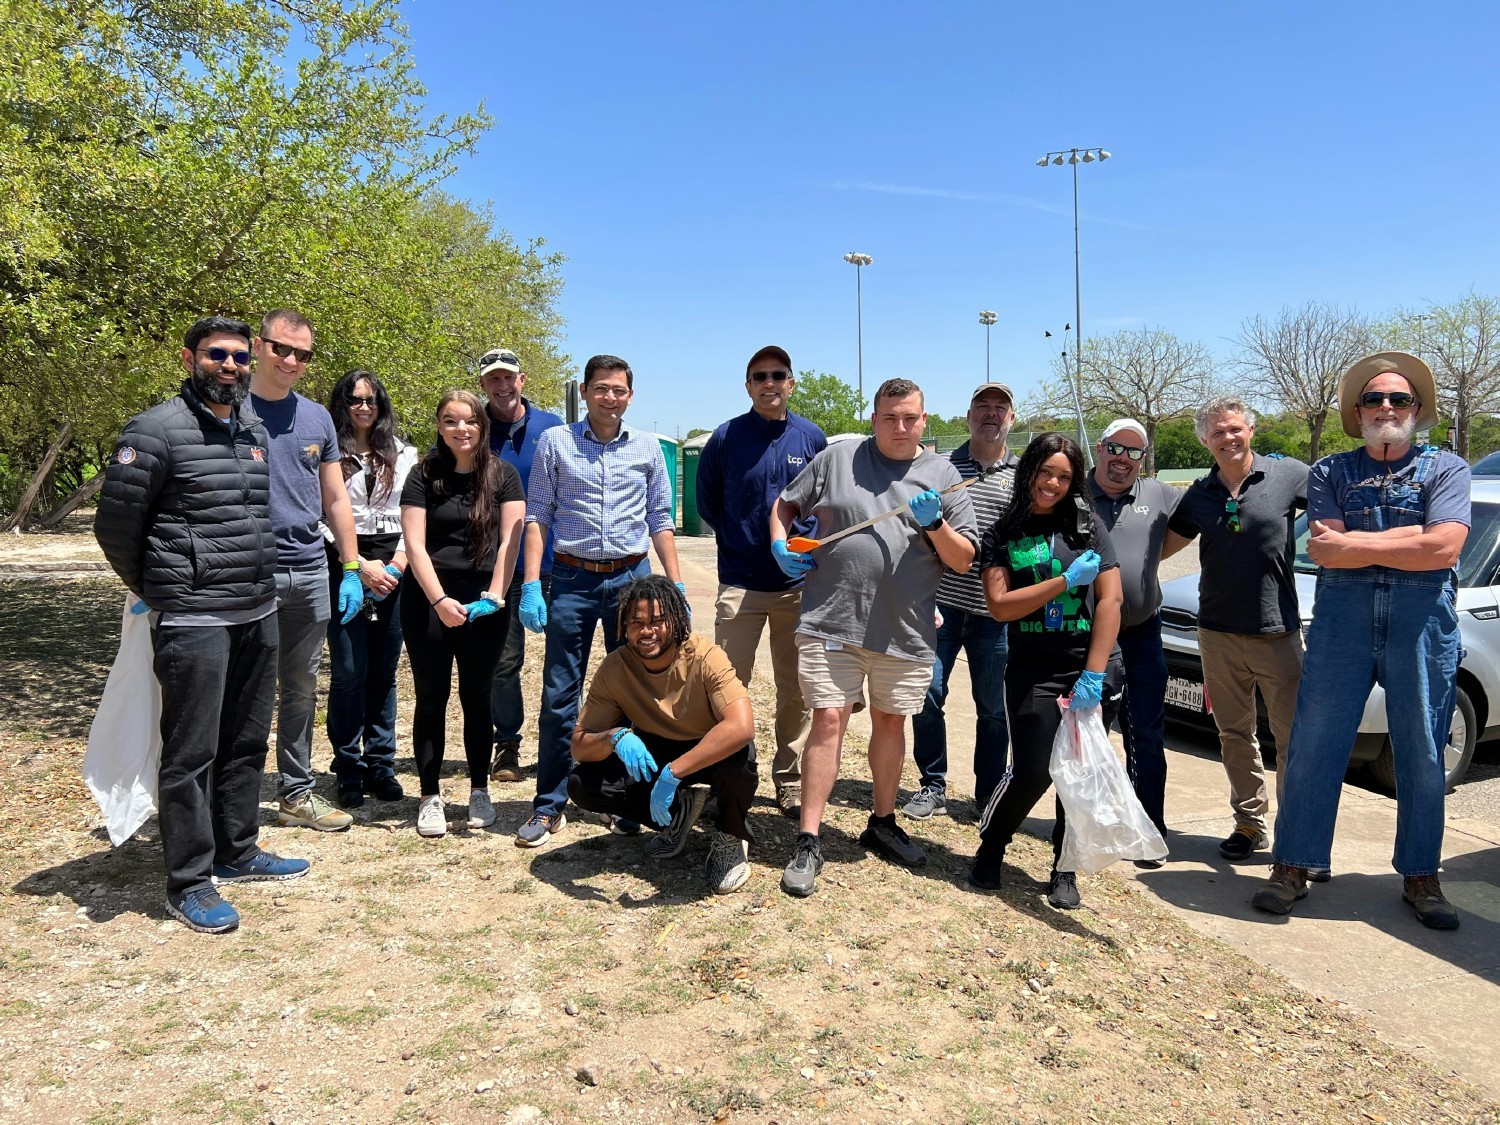 Our Austin crew volunteering to clean up a local park.